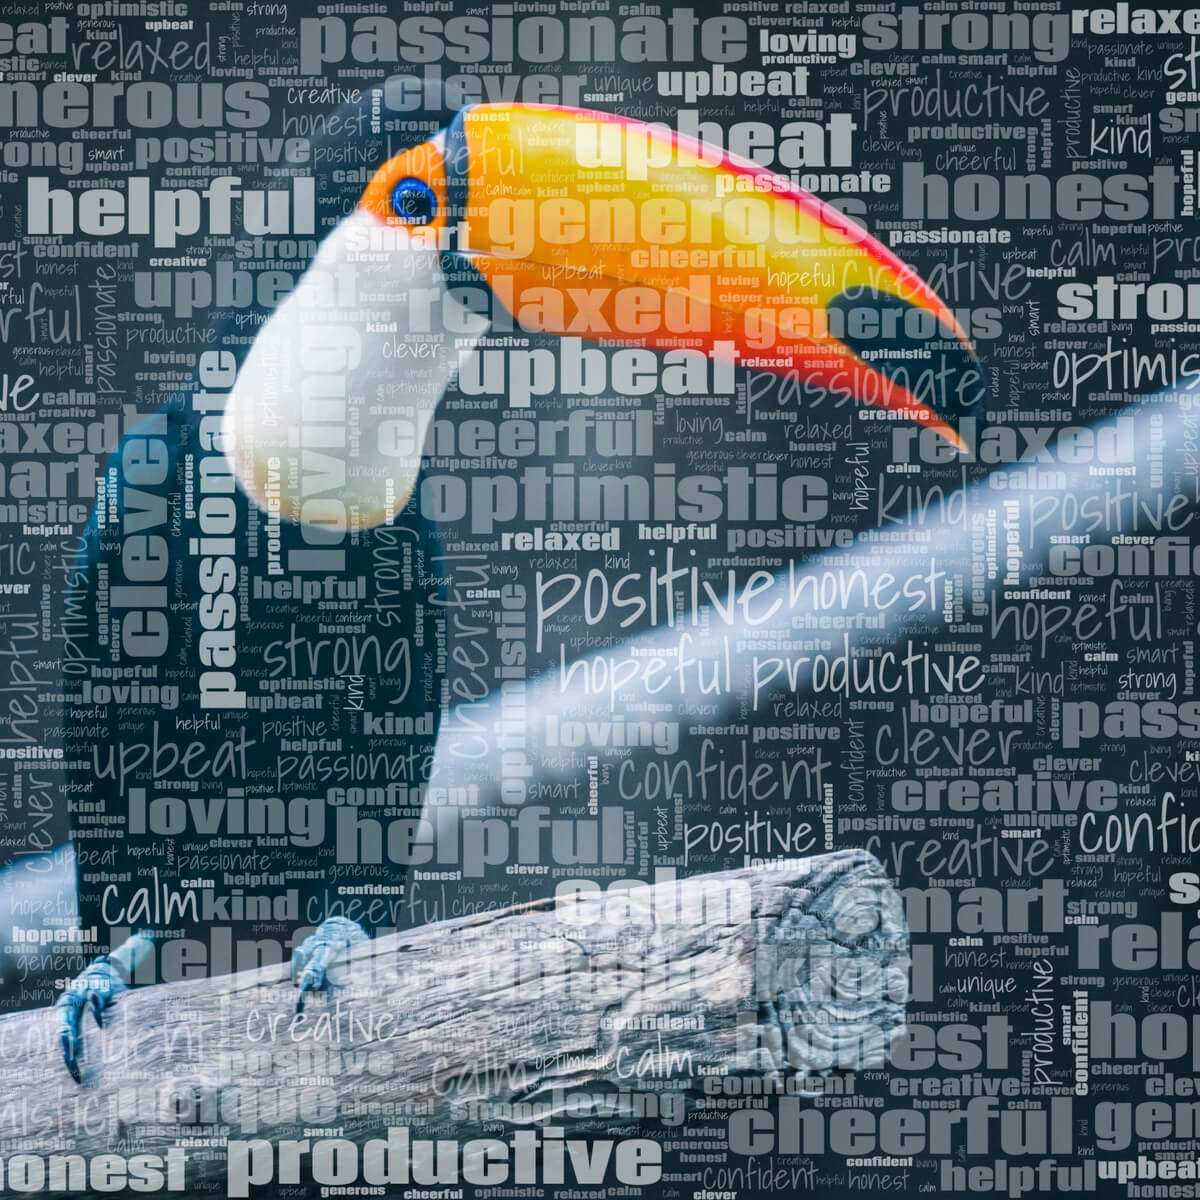 A word cloud with words such as "positive", "productive", "helpful" and "optimistic", in a semi-transparent font, on the background of a photograph of a colourful toucan bird.